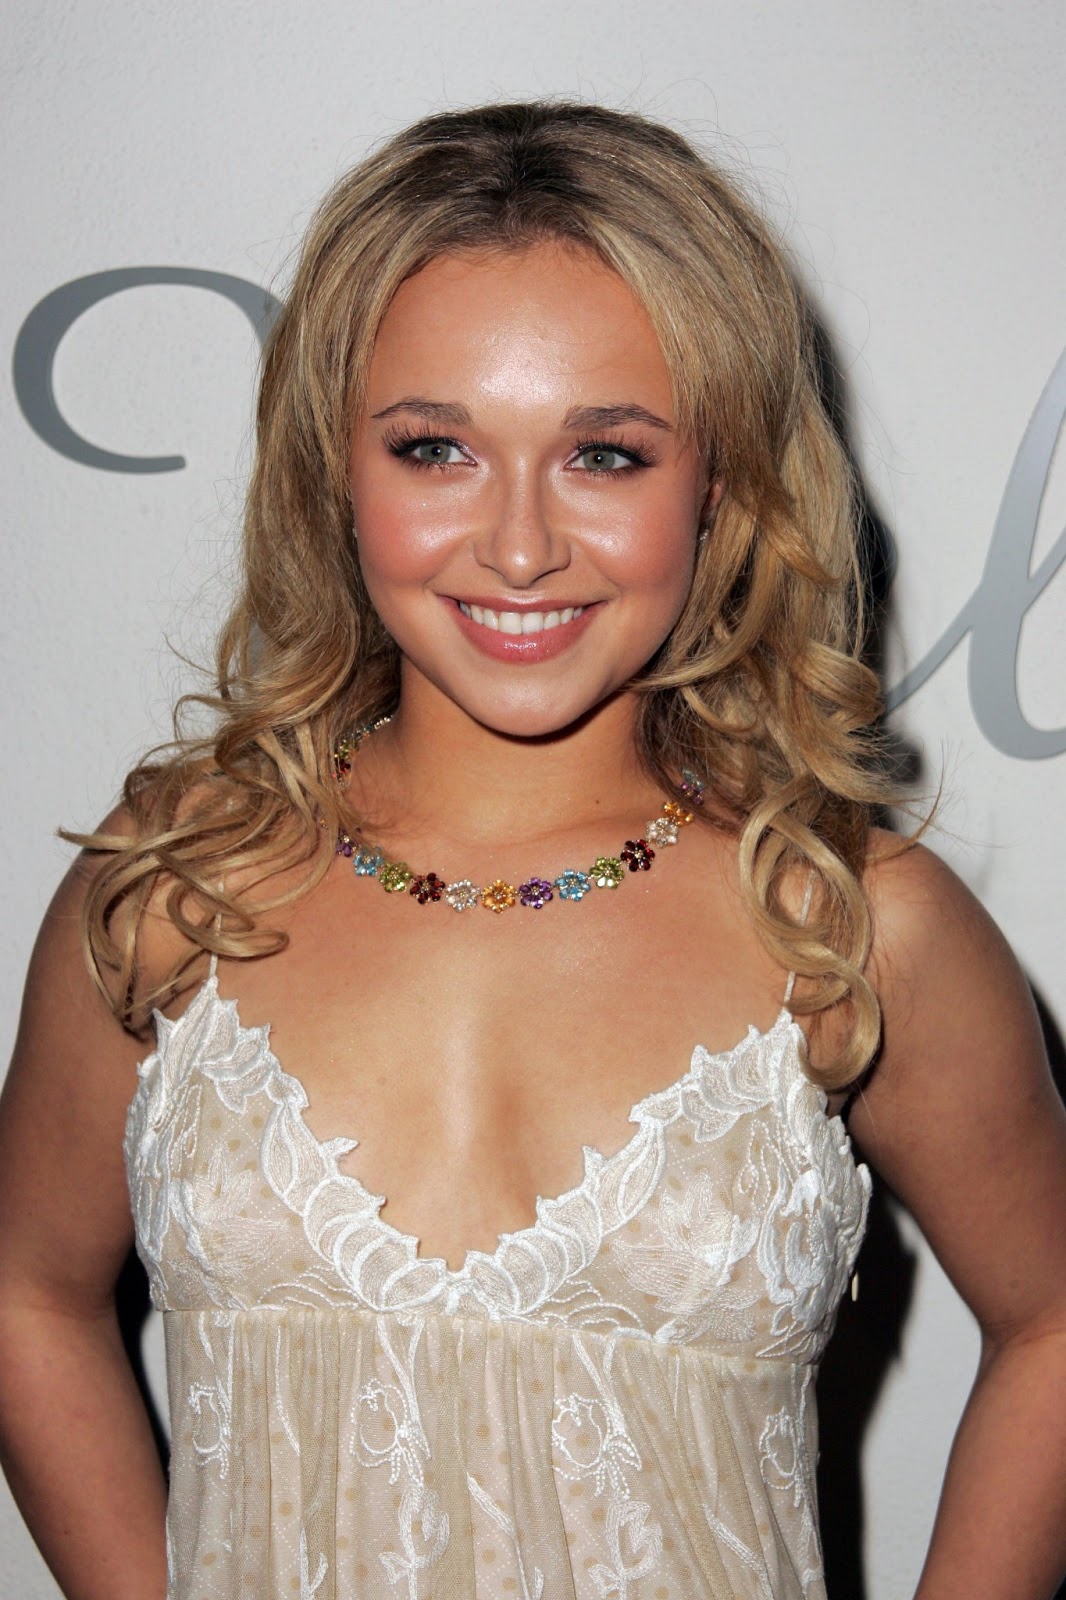 Actress Hot Photo Collection: Hayden Panettiere Hot